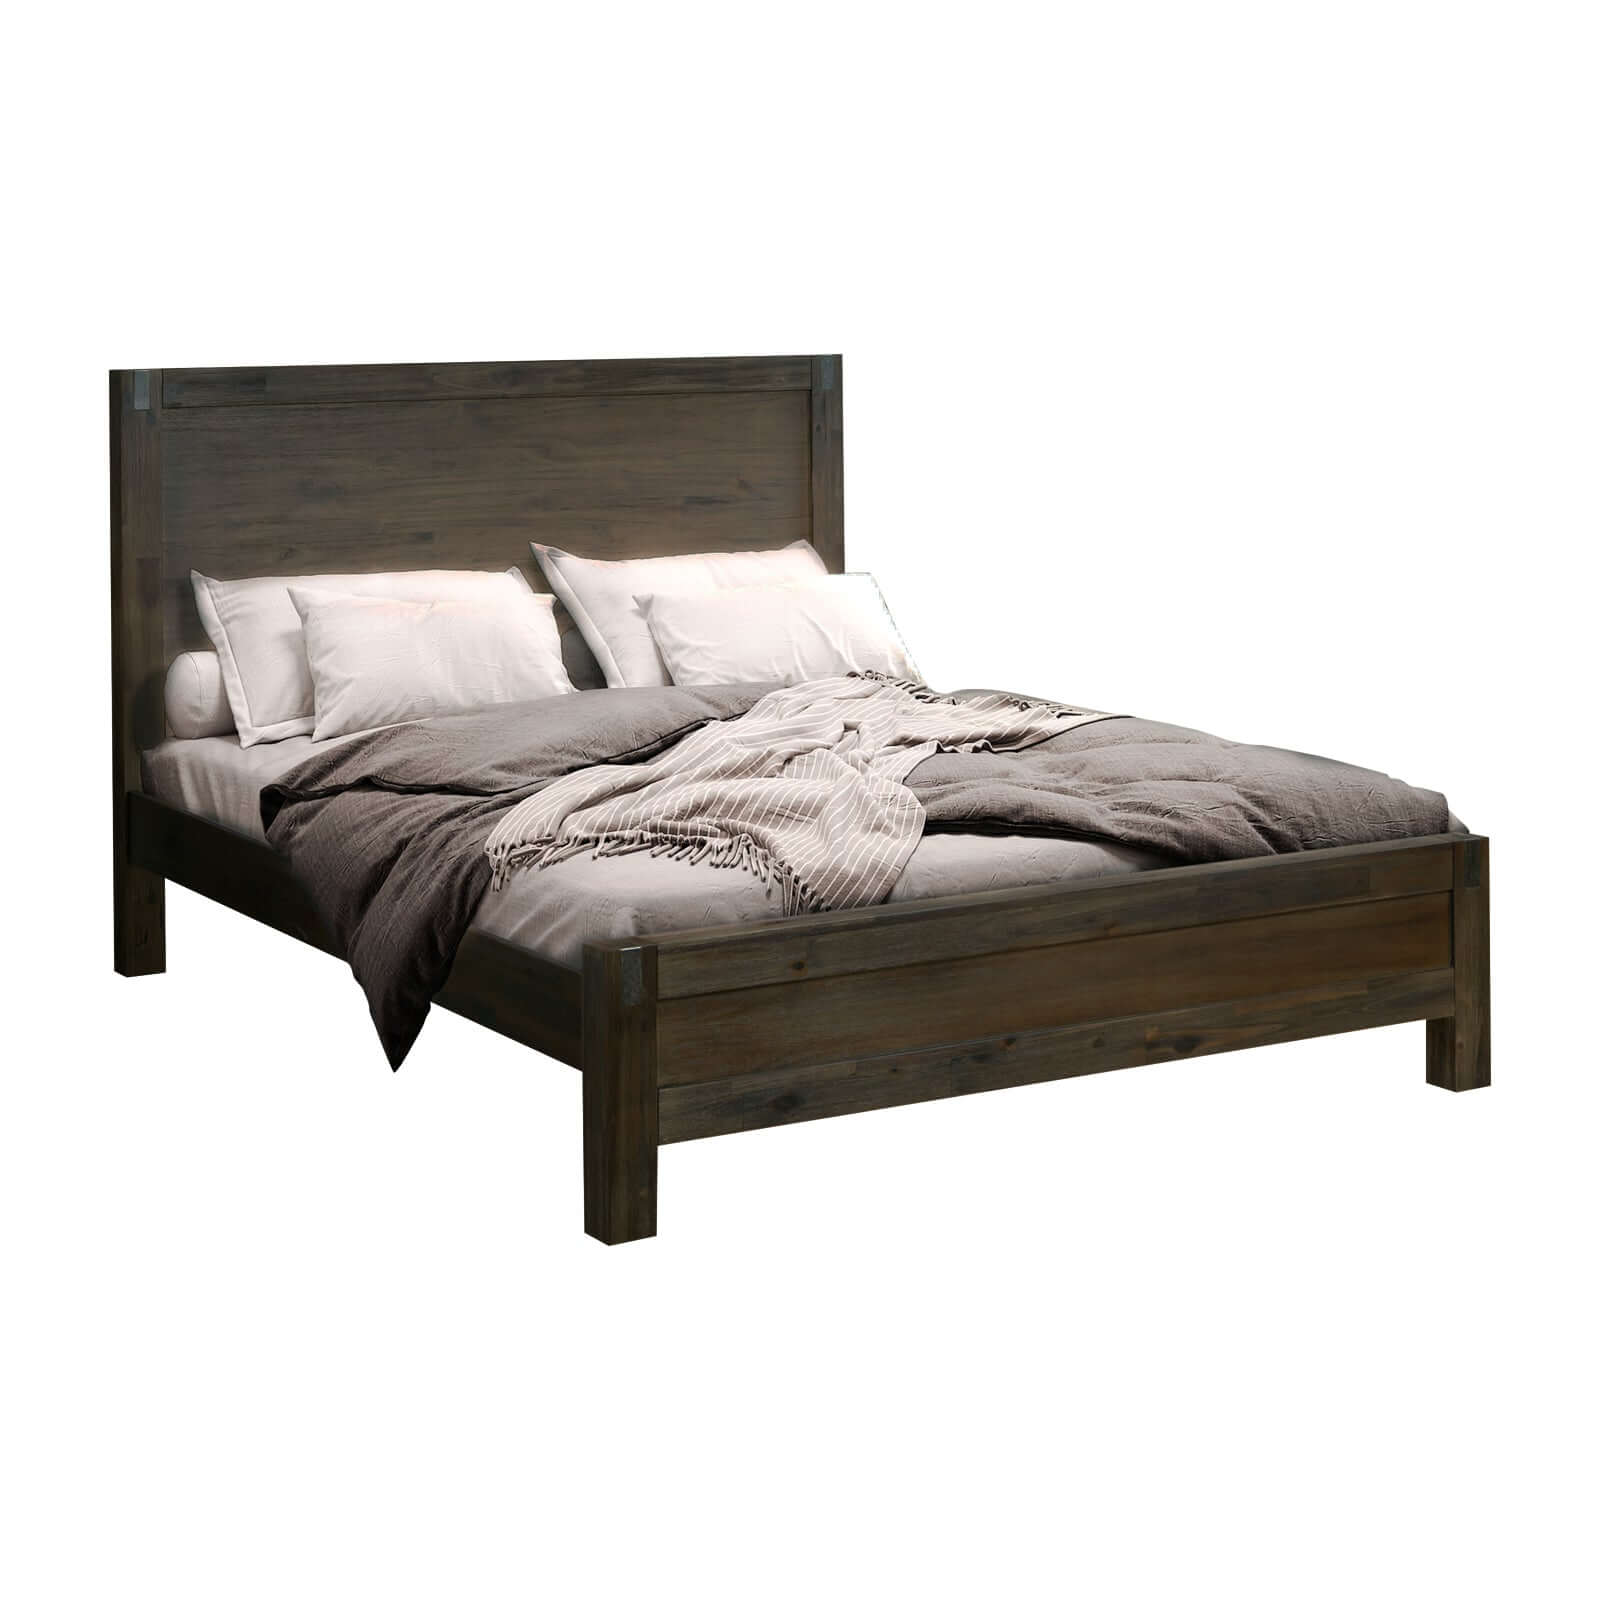 Bed Frame Double Size in Solid Wood Veneered Acacia Bedroom Timber Slat in Chocolate-Upinteriors